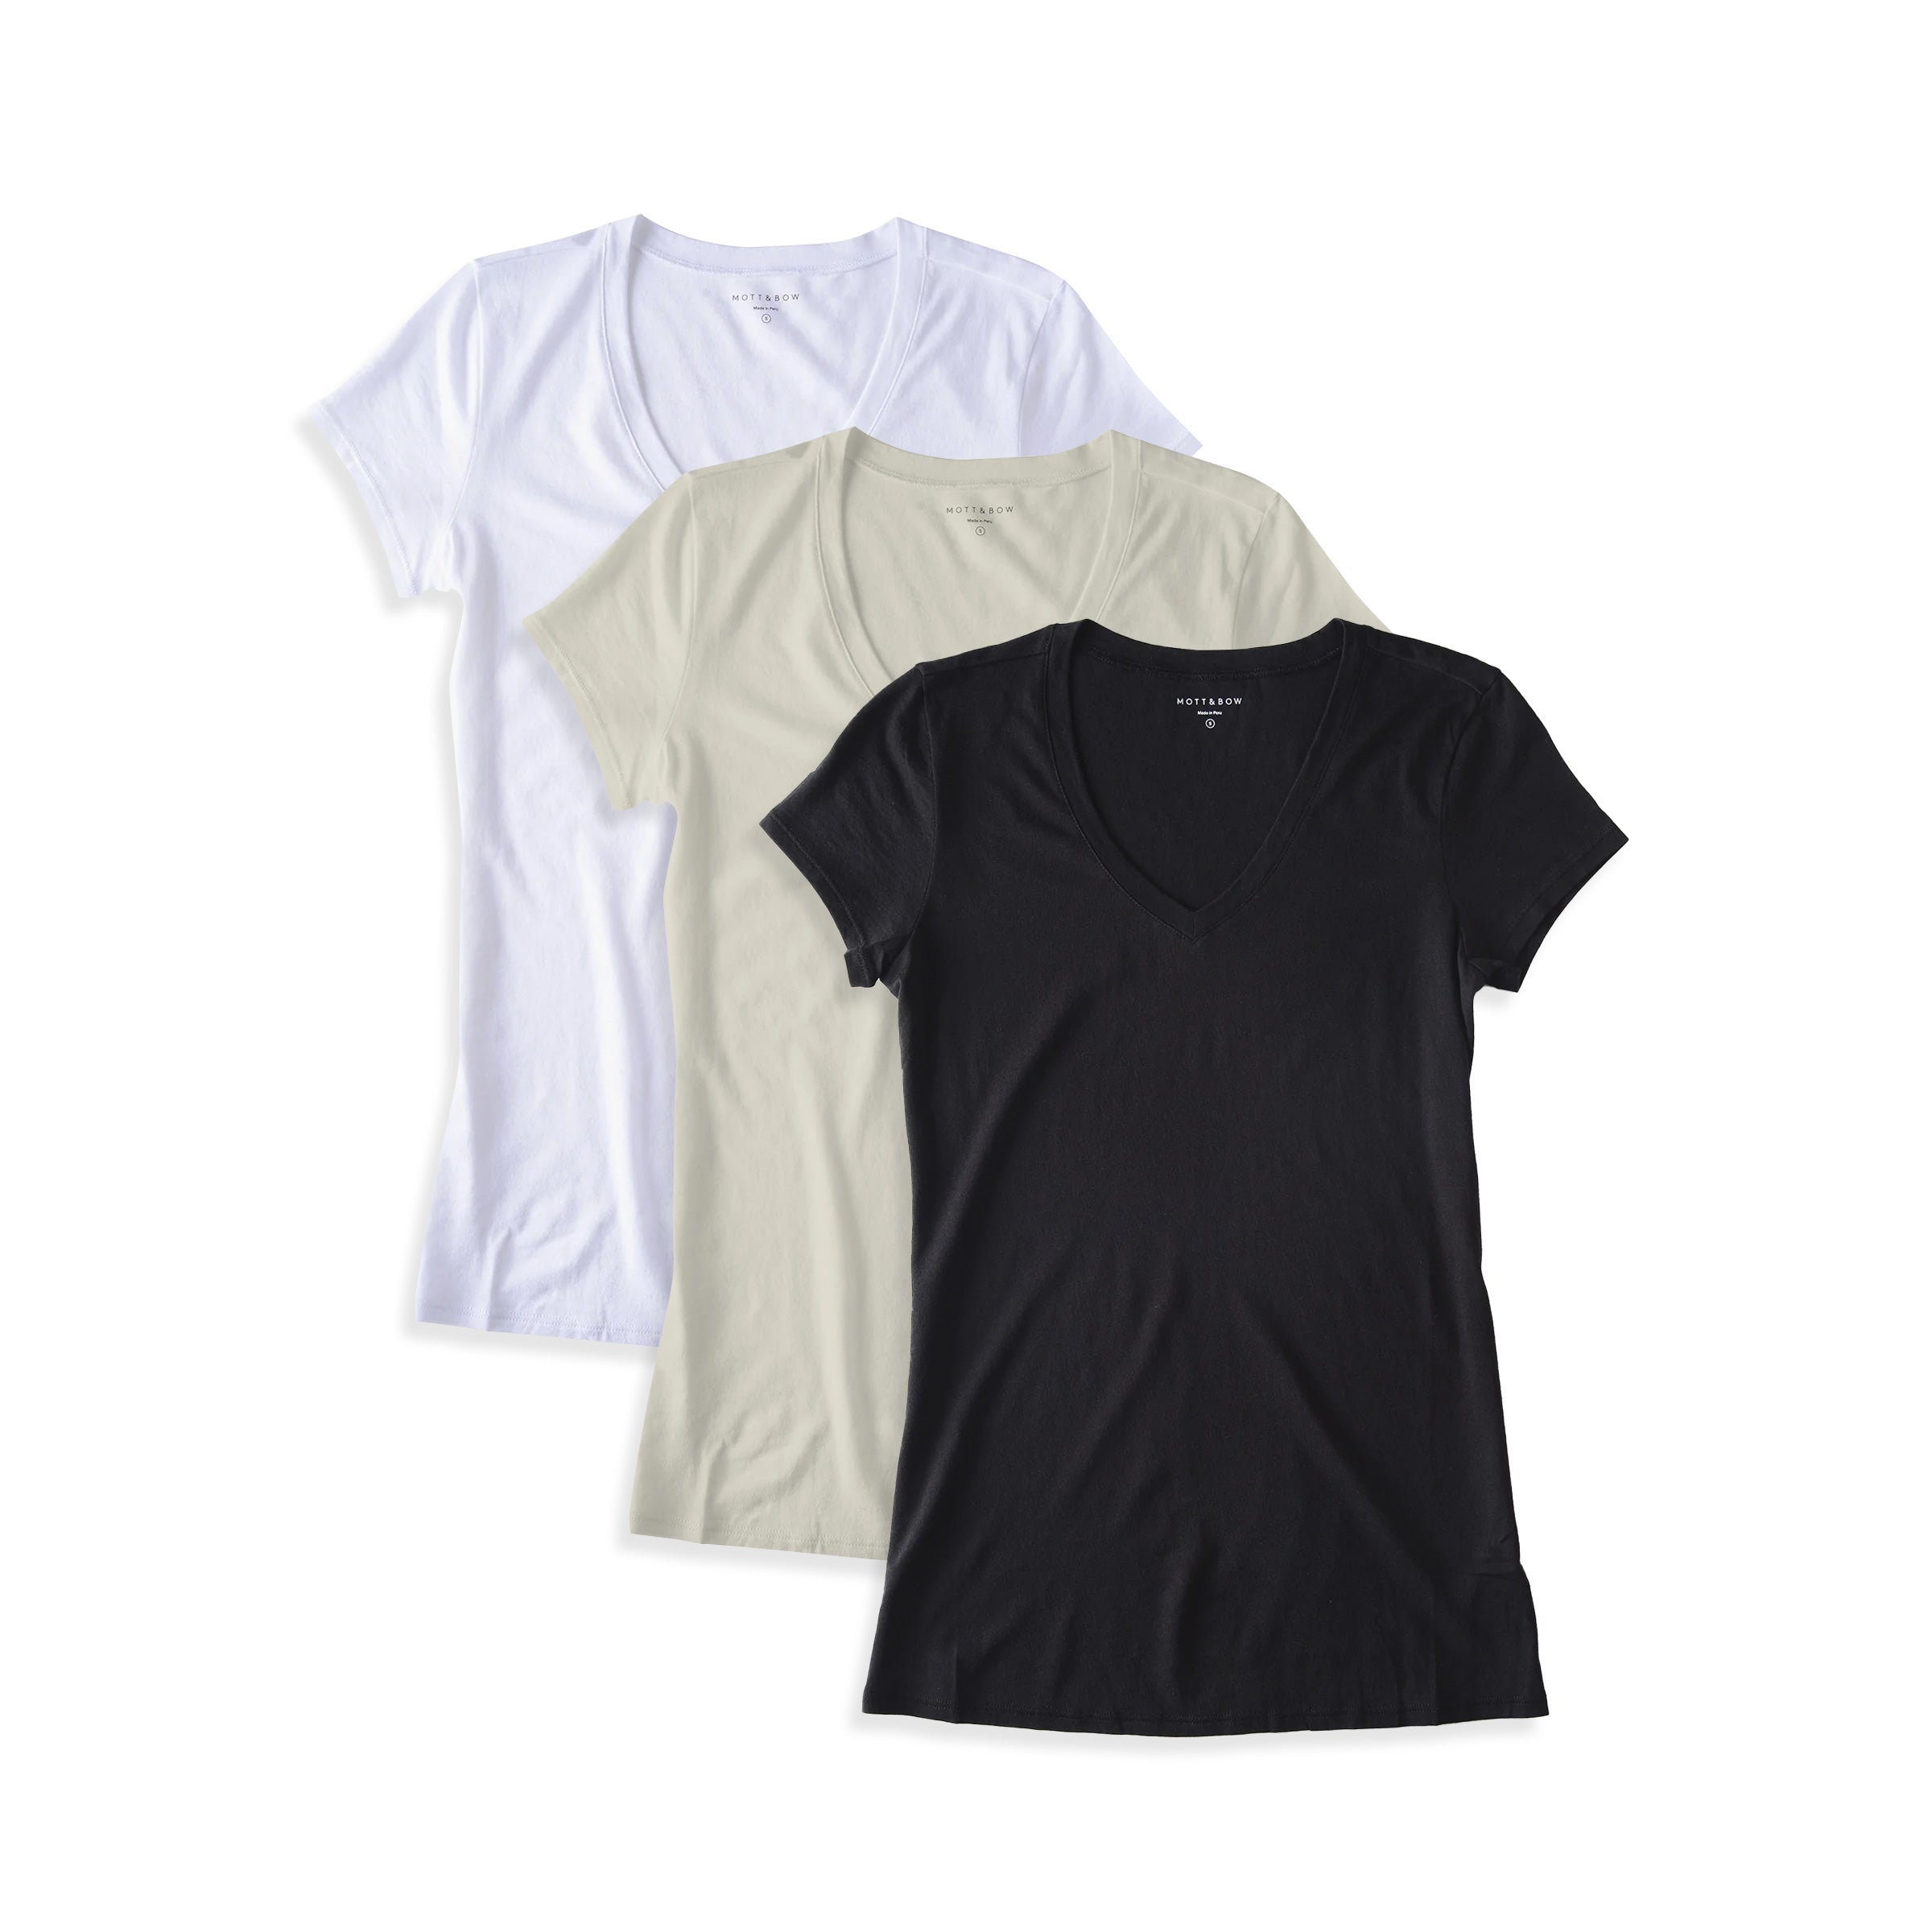 Women wearing Blanco/Blanco vintage/Negro Fitted V-Neck Marcy 3-Pack tees